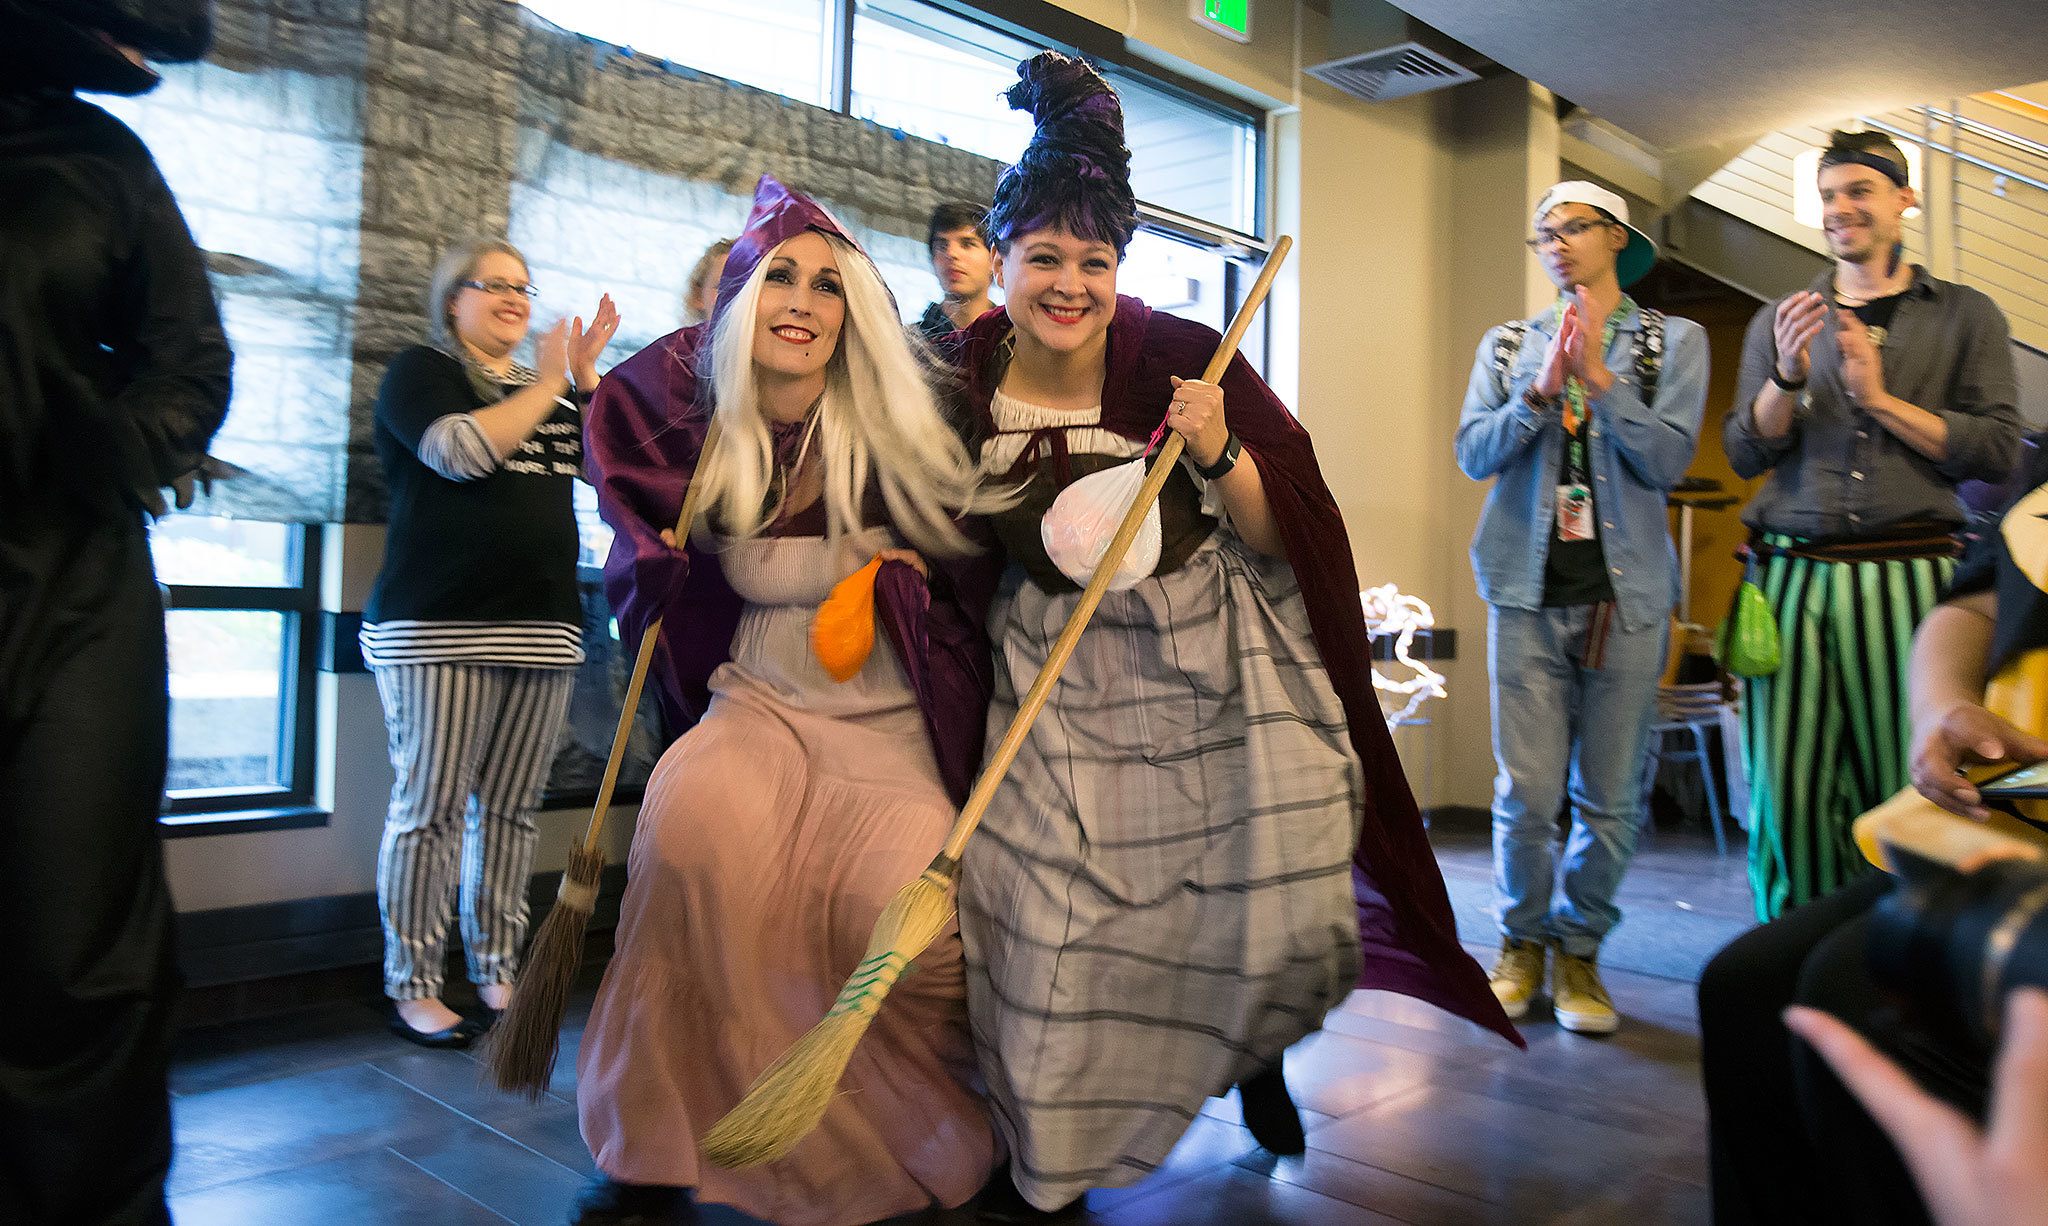 Everett Community College’s Elise Mayes (left) and Stacy Siler creep around as they accept their Faculty and Staff second-place win as the Sanderson Sisters, from the movie “Hocus Pocus,” during the Hallo-Scream Contest at Everett Community College on Monday, Oct. 31, in Everett. (Andy Bronson / The Herald)